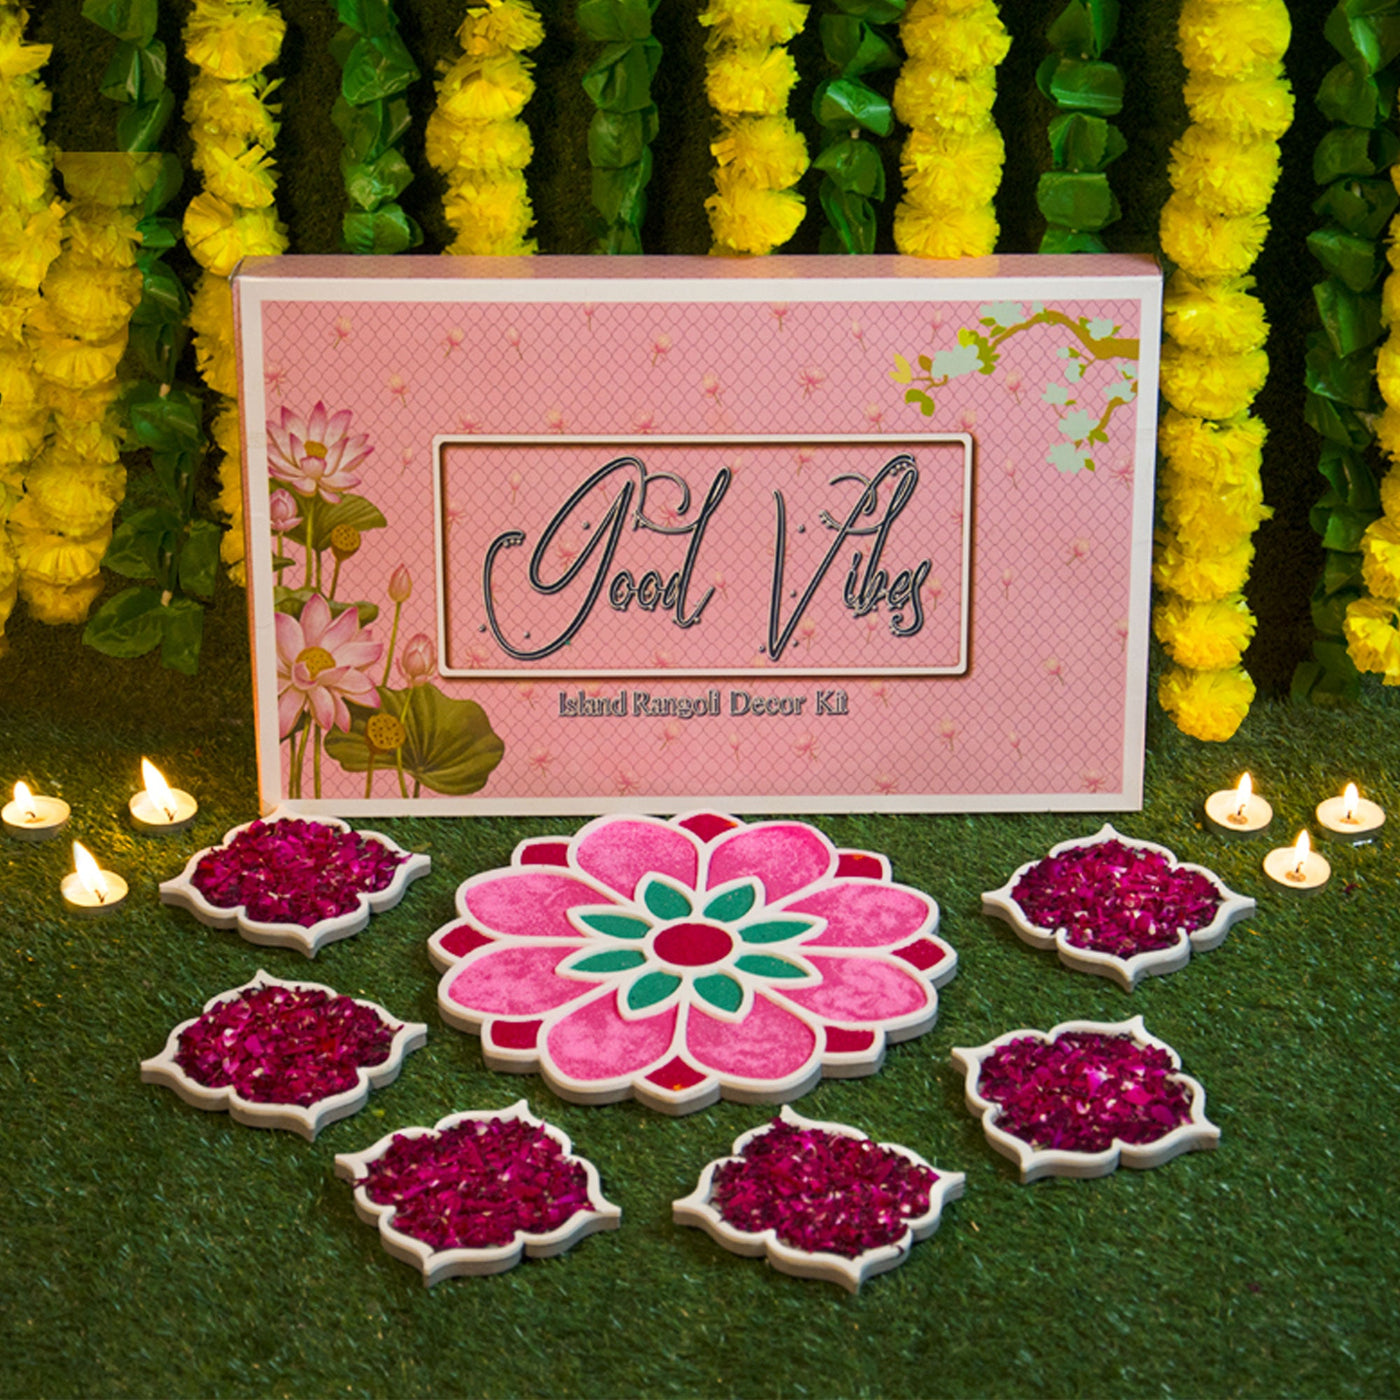 Good Vibes - Gift Box for Every Occasion island rangoli design template 